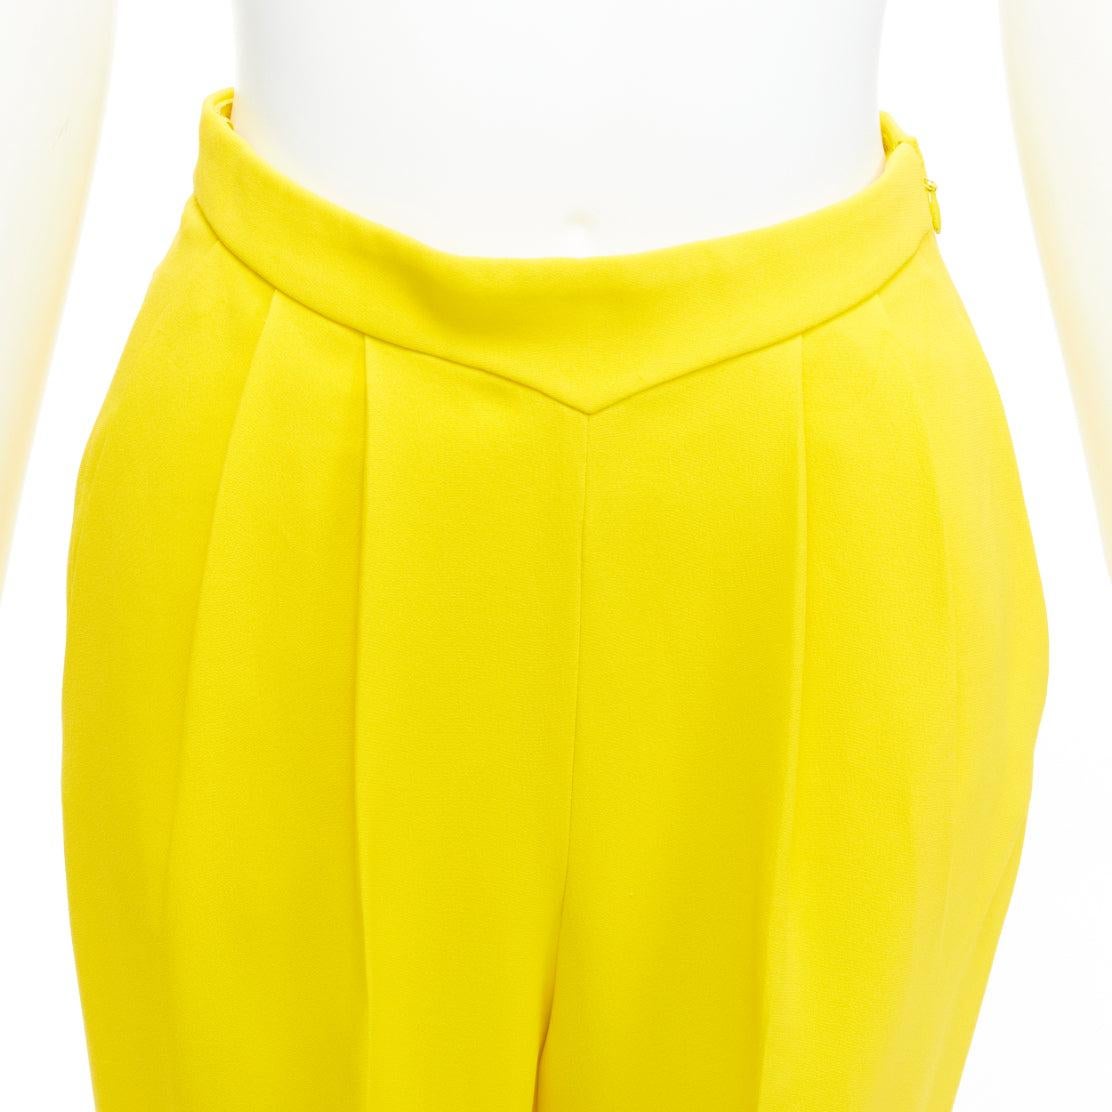 DELPOZO yellow viscose blend high V waistband harem pants FR36 S
Reference: LNKO/A02282
Brand: Delpozo
Material: Viscose, Blend
Color: Yellow
Pattern: Solid
Closure: Zip
Extra Details: Side zip.
Made in: Spain

CONDITION:
Condition: Very good, this